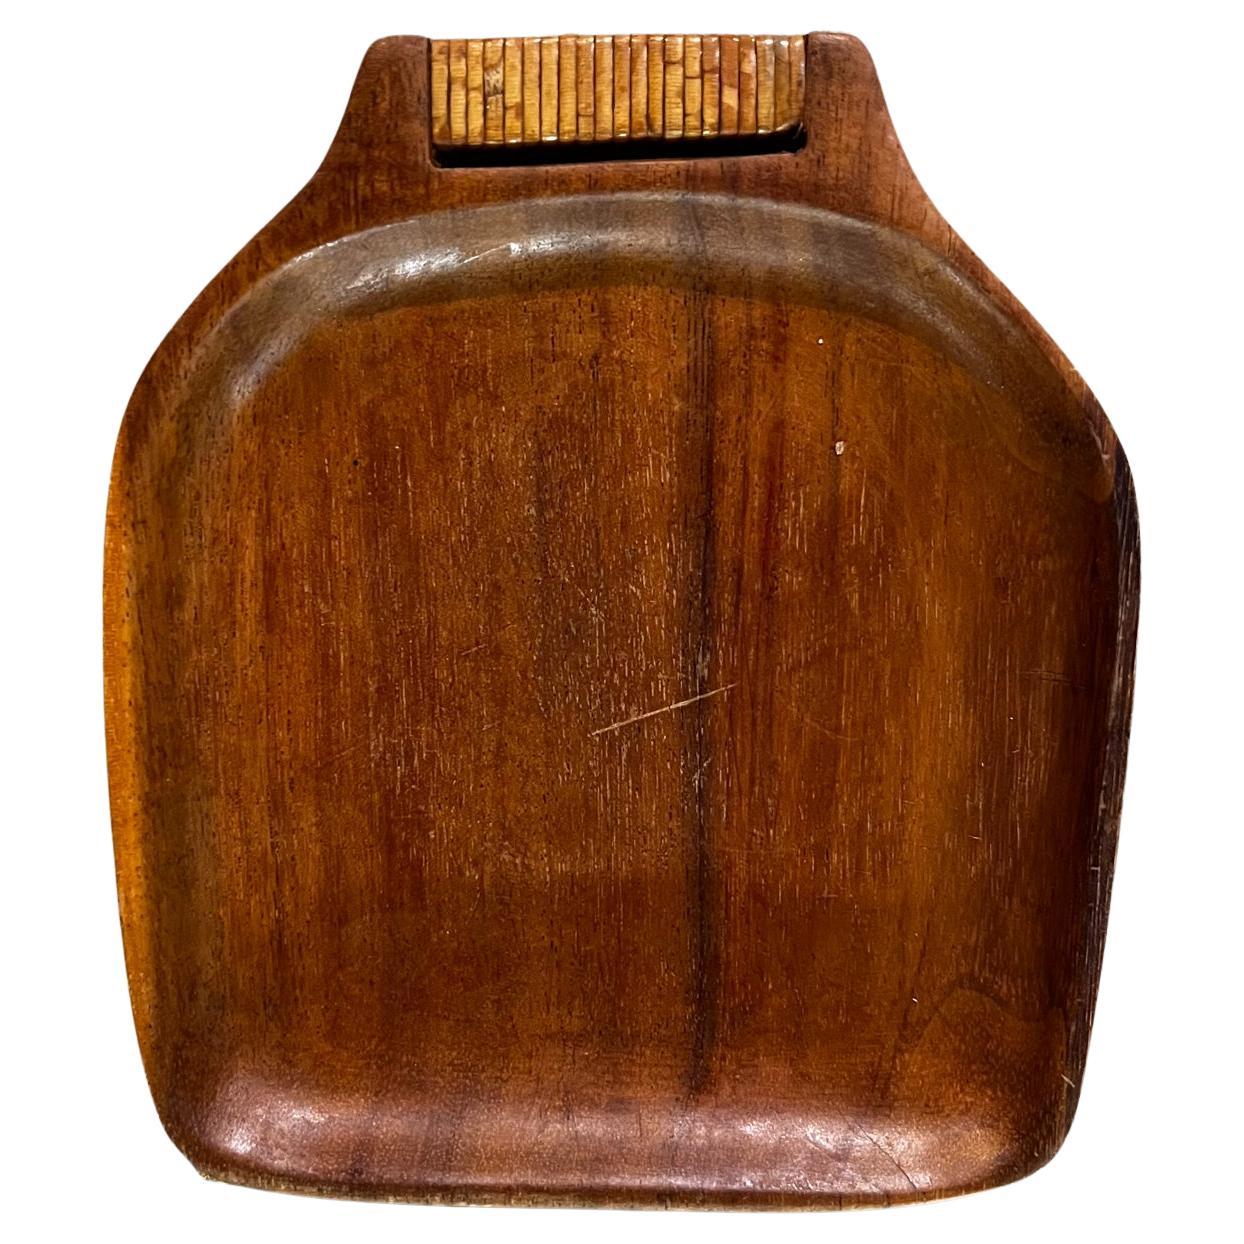 1960s stylish Modern Teakwood Tray with Cane Wrapped Handle
Appears to be teak wood. 
Unmarked.
Measures: 7.13 depth x 6.25 width x .75 thick
Preowned vintage condition.
Refer to images provided please.

